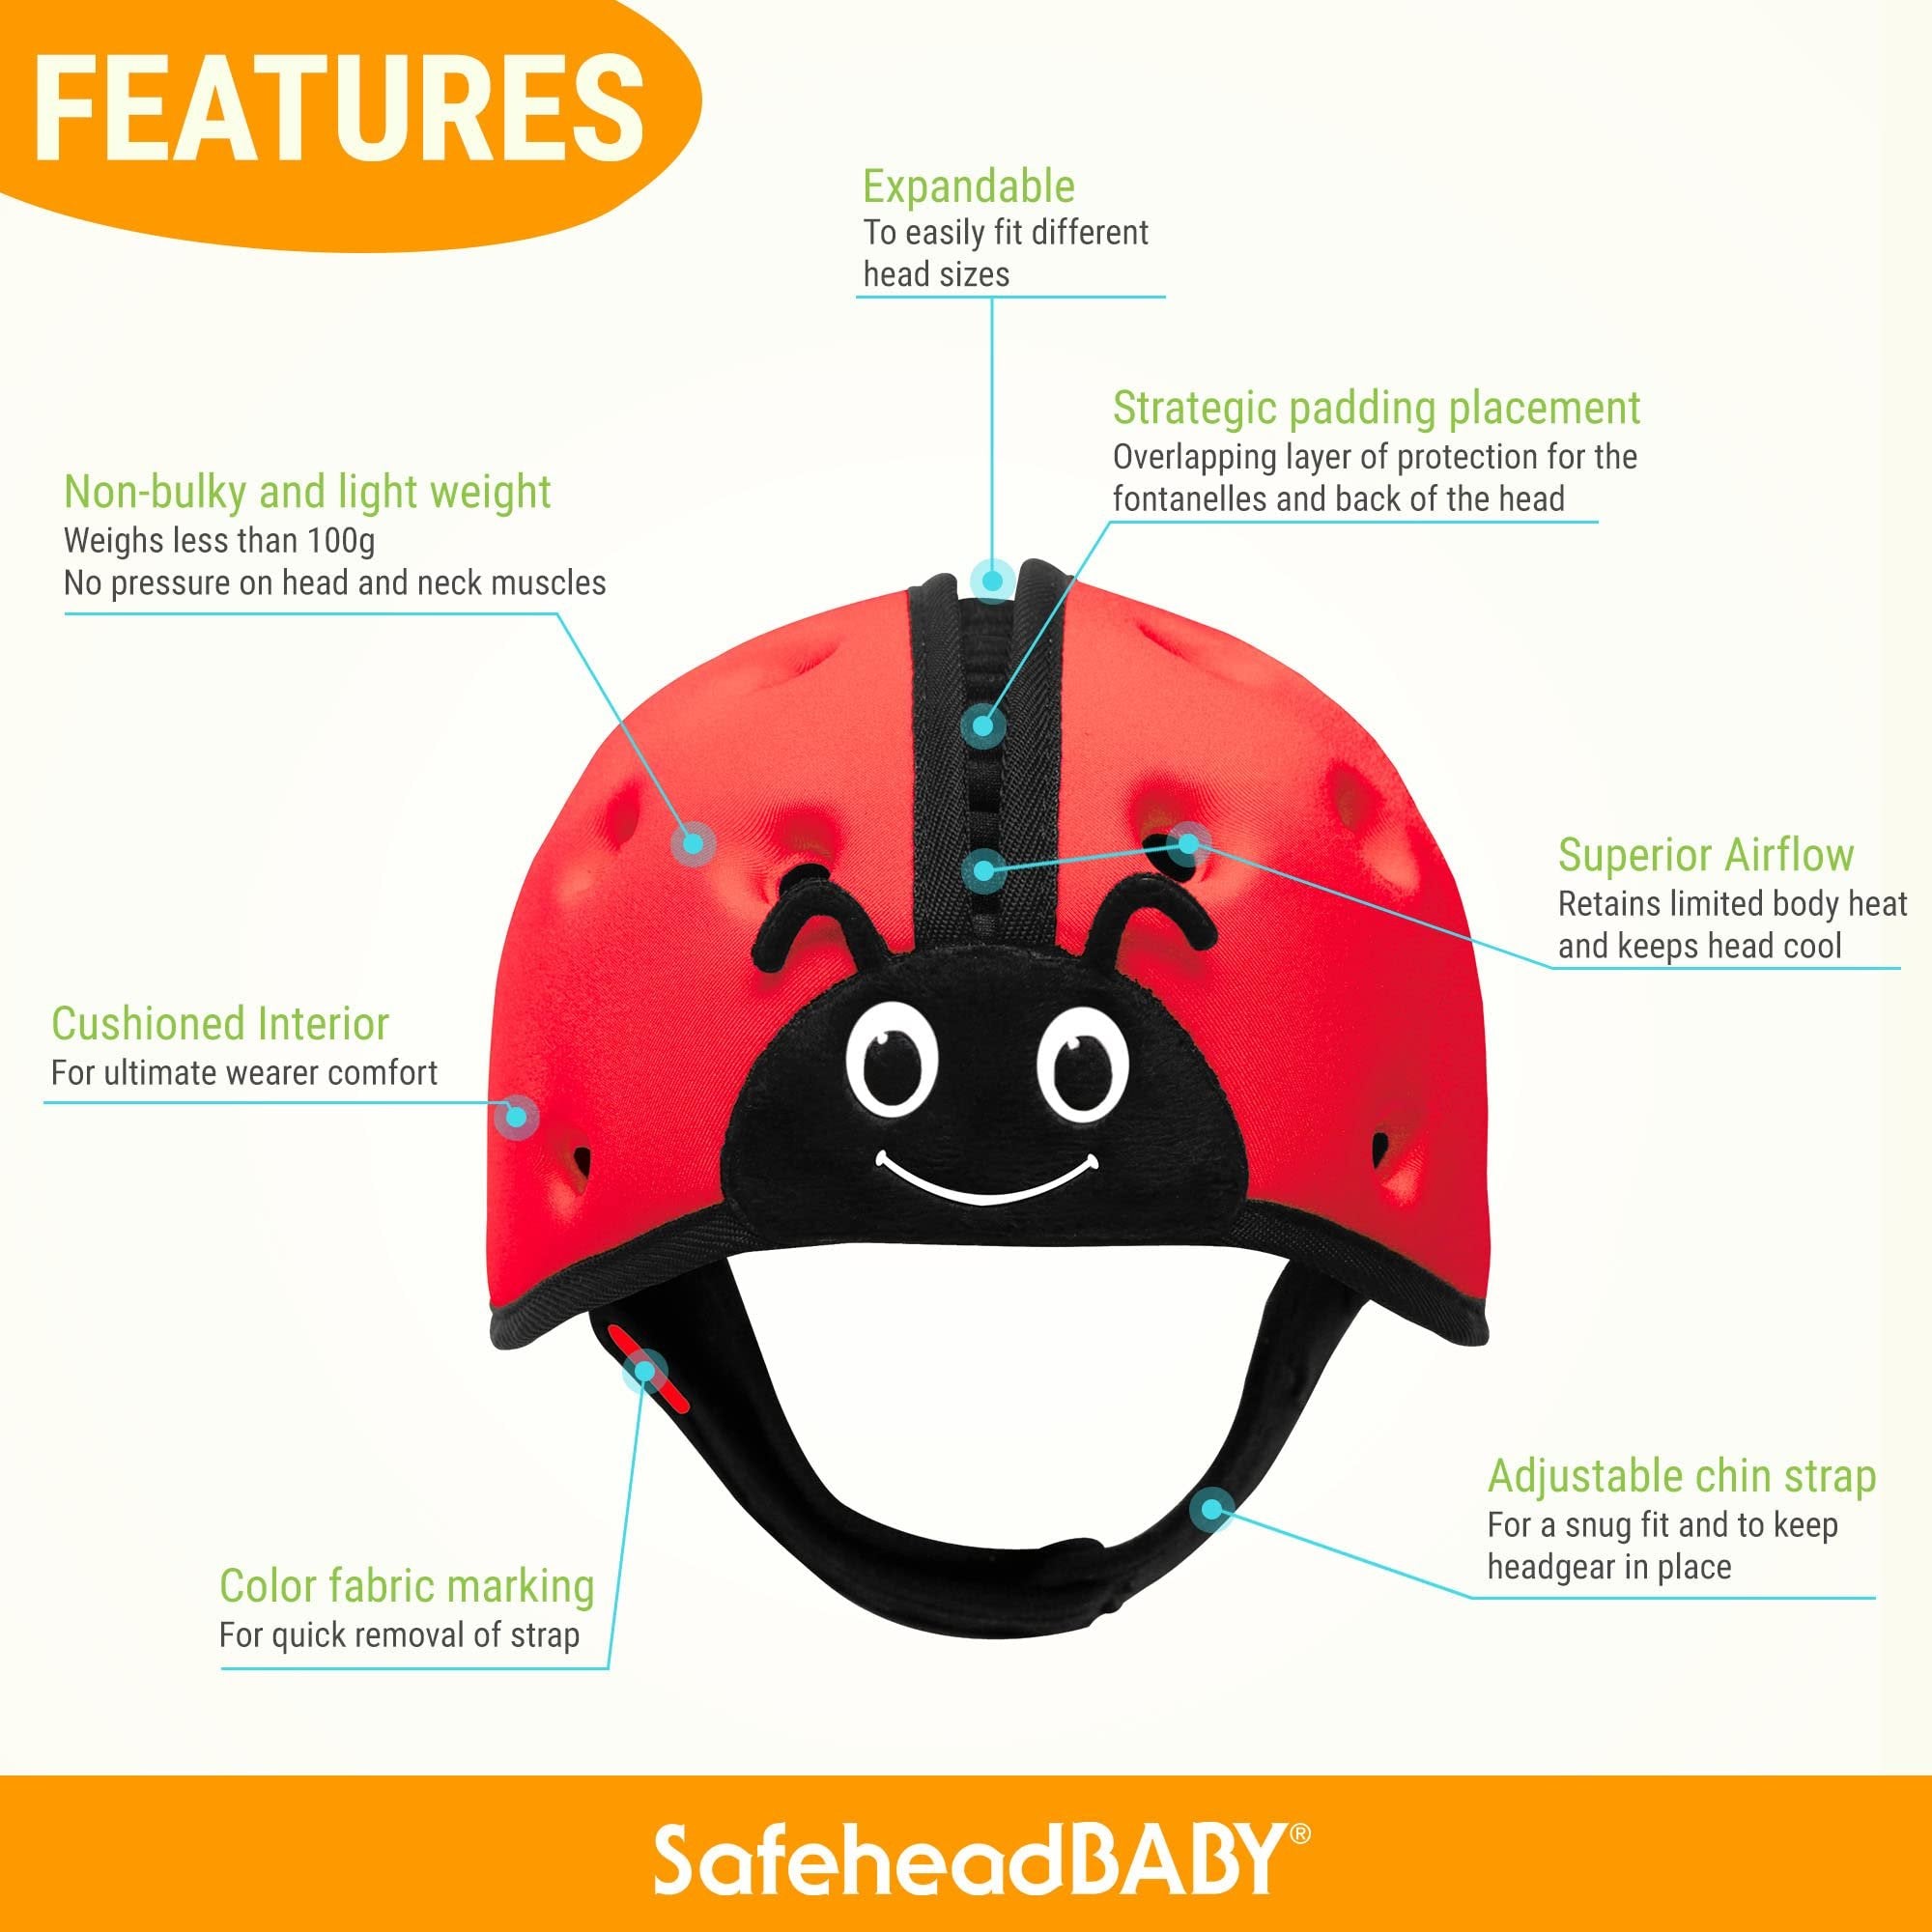 SafeheadBABY Infant Safety Helmet - Red, Adjustable, Lightweight - Size 1 - Crawling, Walking, Head Protection